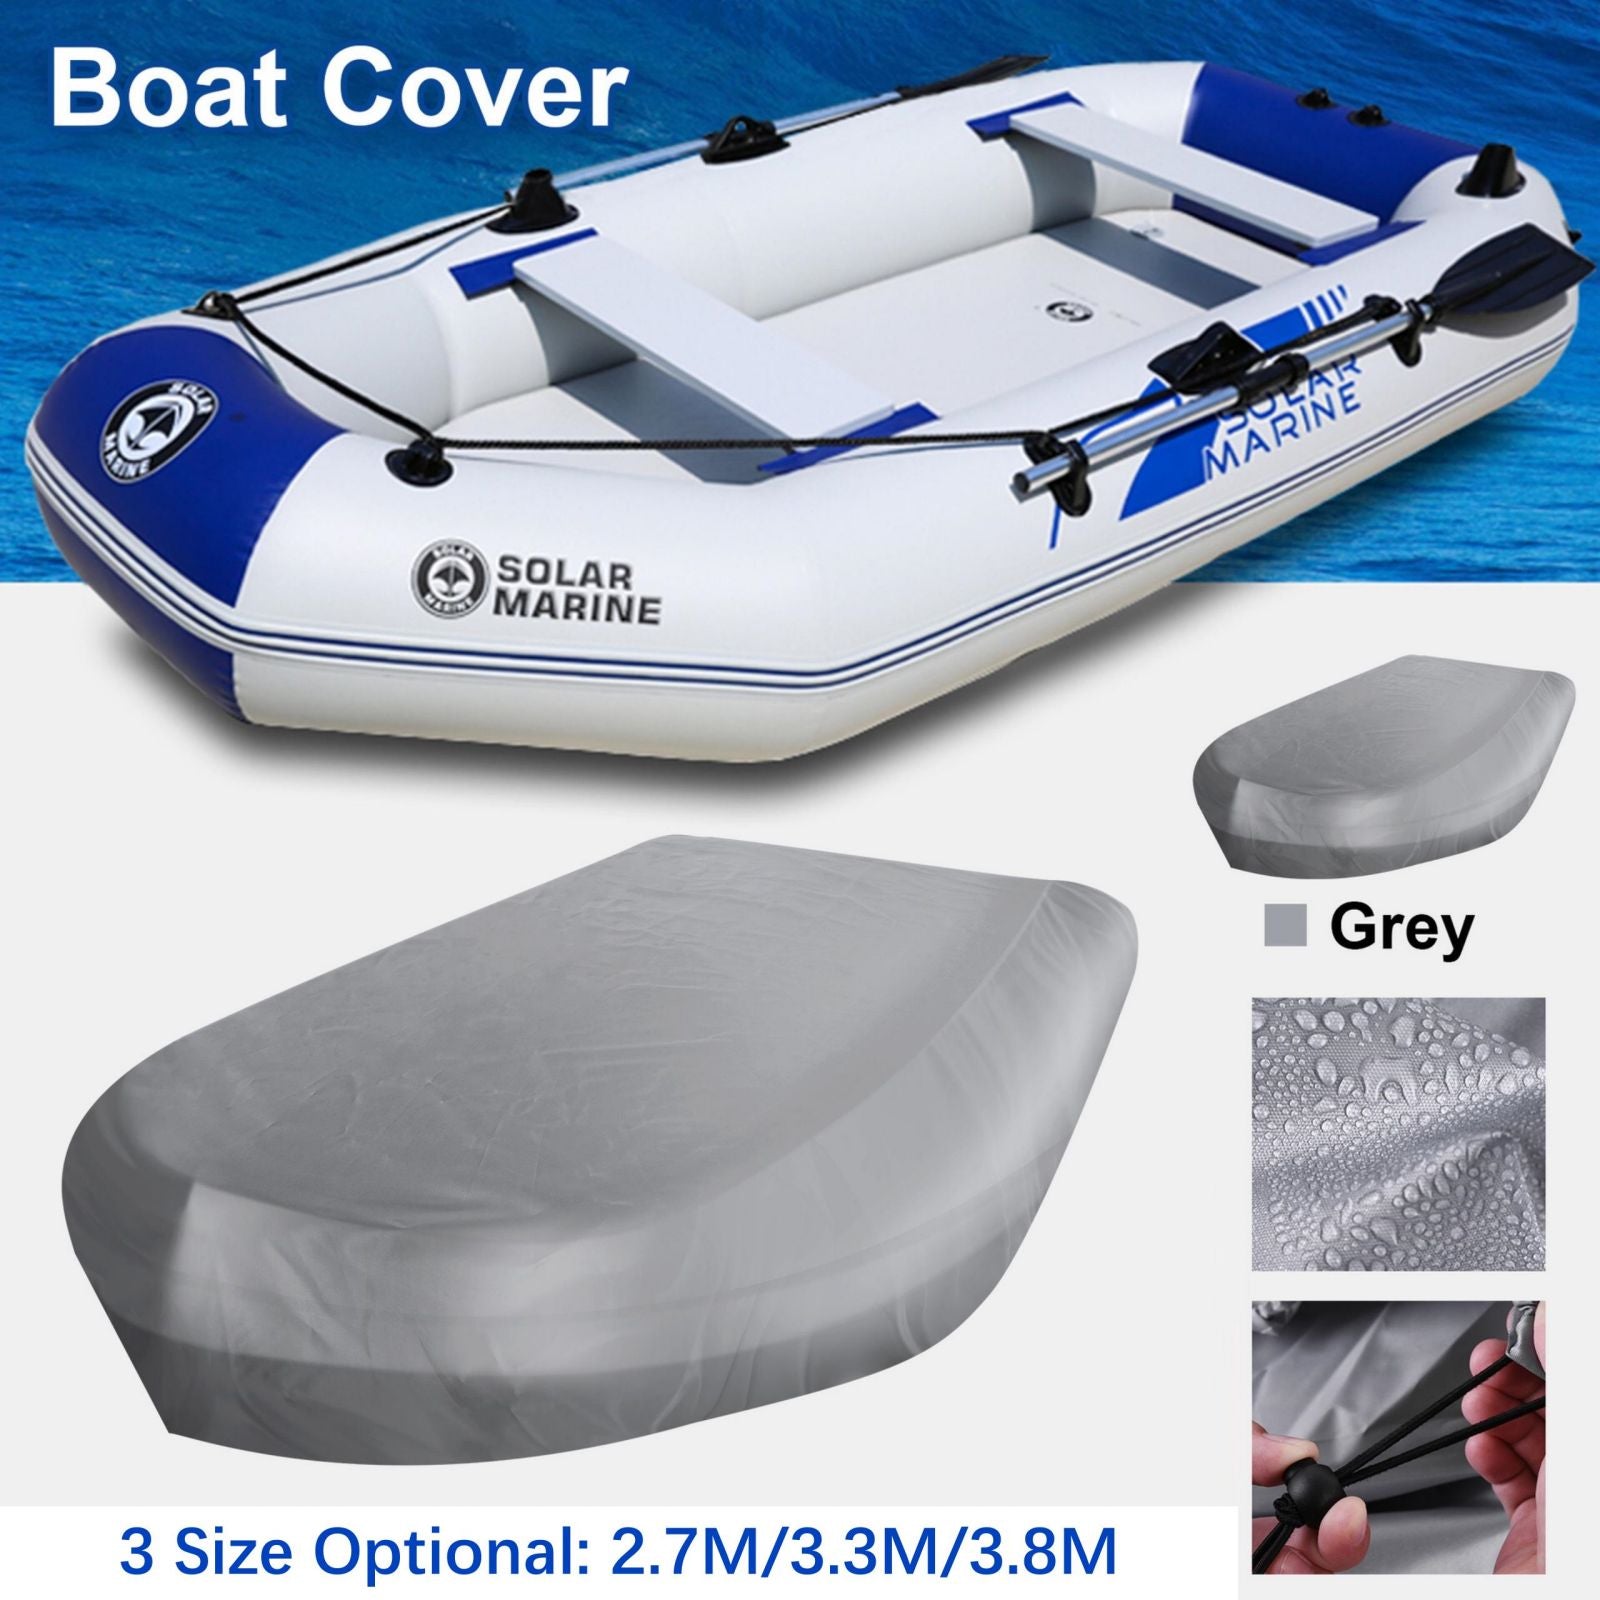 210D Inflatable Boat Cover UV Resistant Inflatable Dinghy Boat Cover Waterproof UV Sun Dust Protective Case Kayak Oxford Cloth Cover